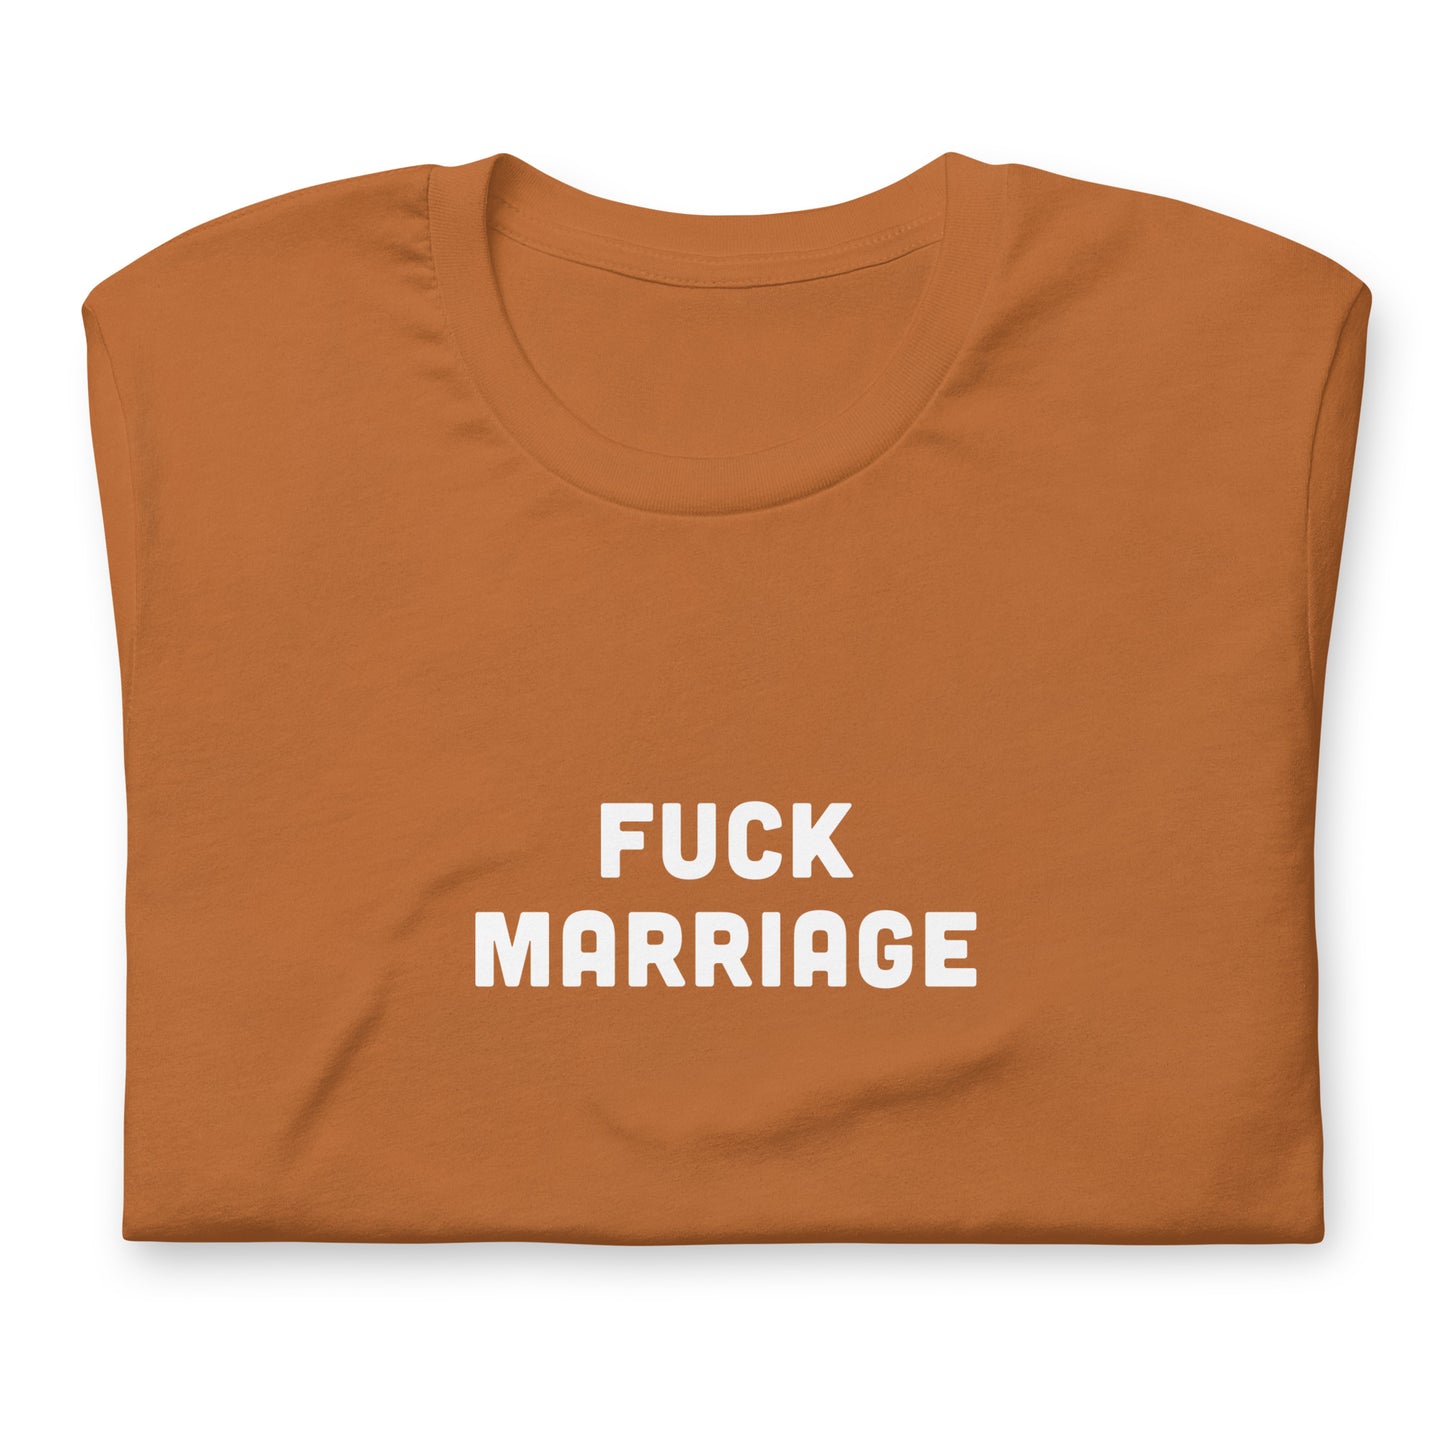 Fuck Marriage T-Shirt Size XL Color Navy